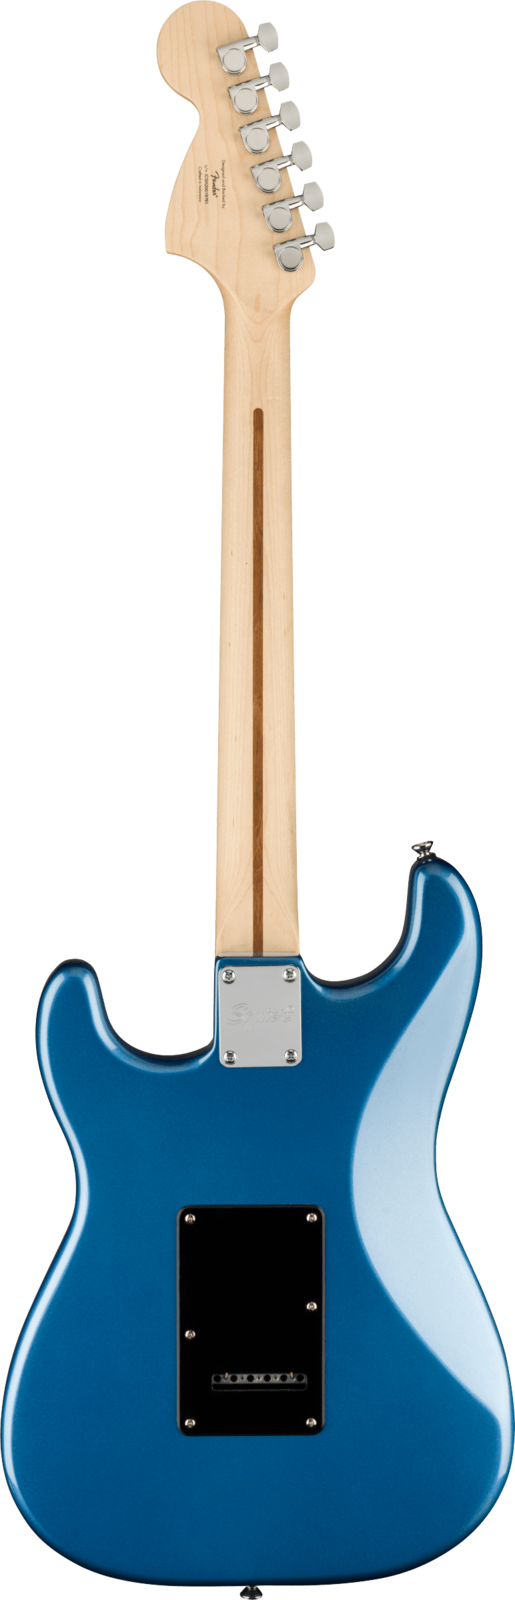 Squier Affinity Stratocaster Lake Placid Blue